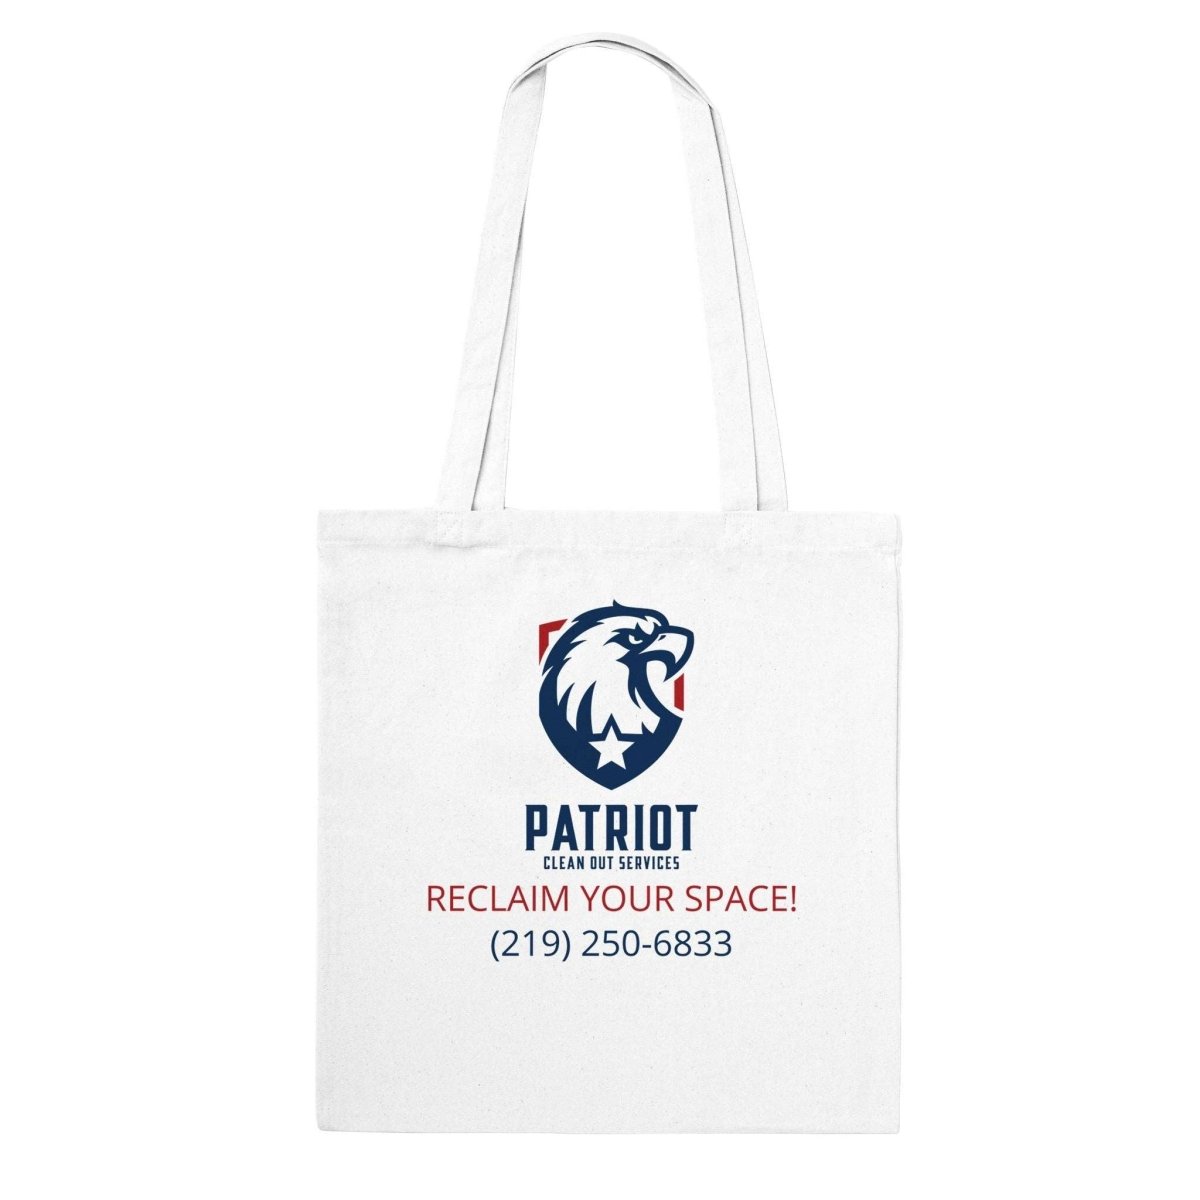 Patriotic Tote Bag with Patriot Clean Out Logo and long handles - Print Material - White